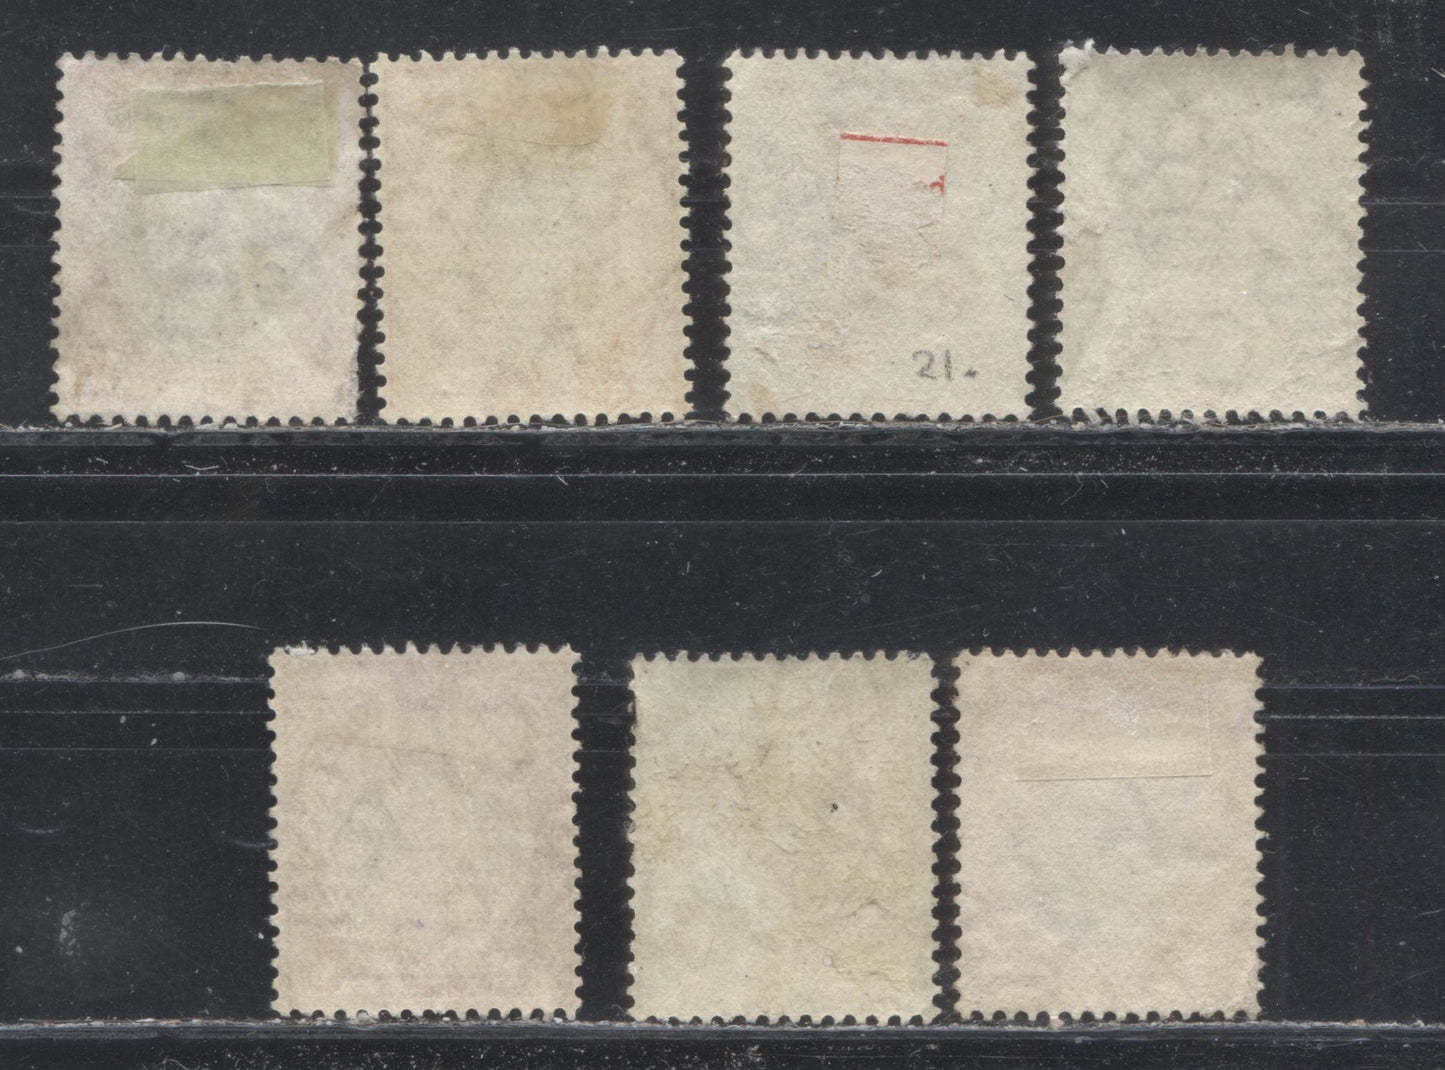 Southern Nigeria SG#21a,22a,26a,27a 1/2d Gray Black And Pale Green, 1d Gray Black And Carmine, 4d Gray Black and Olive-Green, 6d Gray Black And Bright Purple King Edward VII Issue 1904-1909 De La Rue Keyplate Design, Chalky Paper, 7 VF CDS Cancels